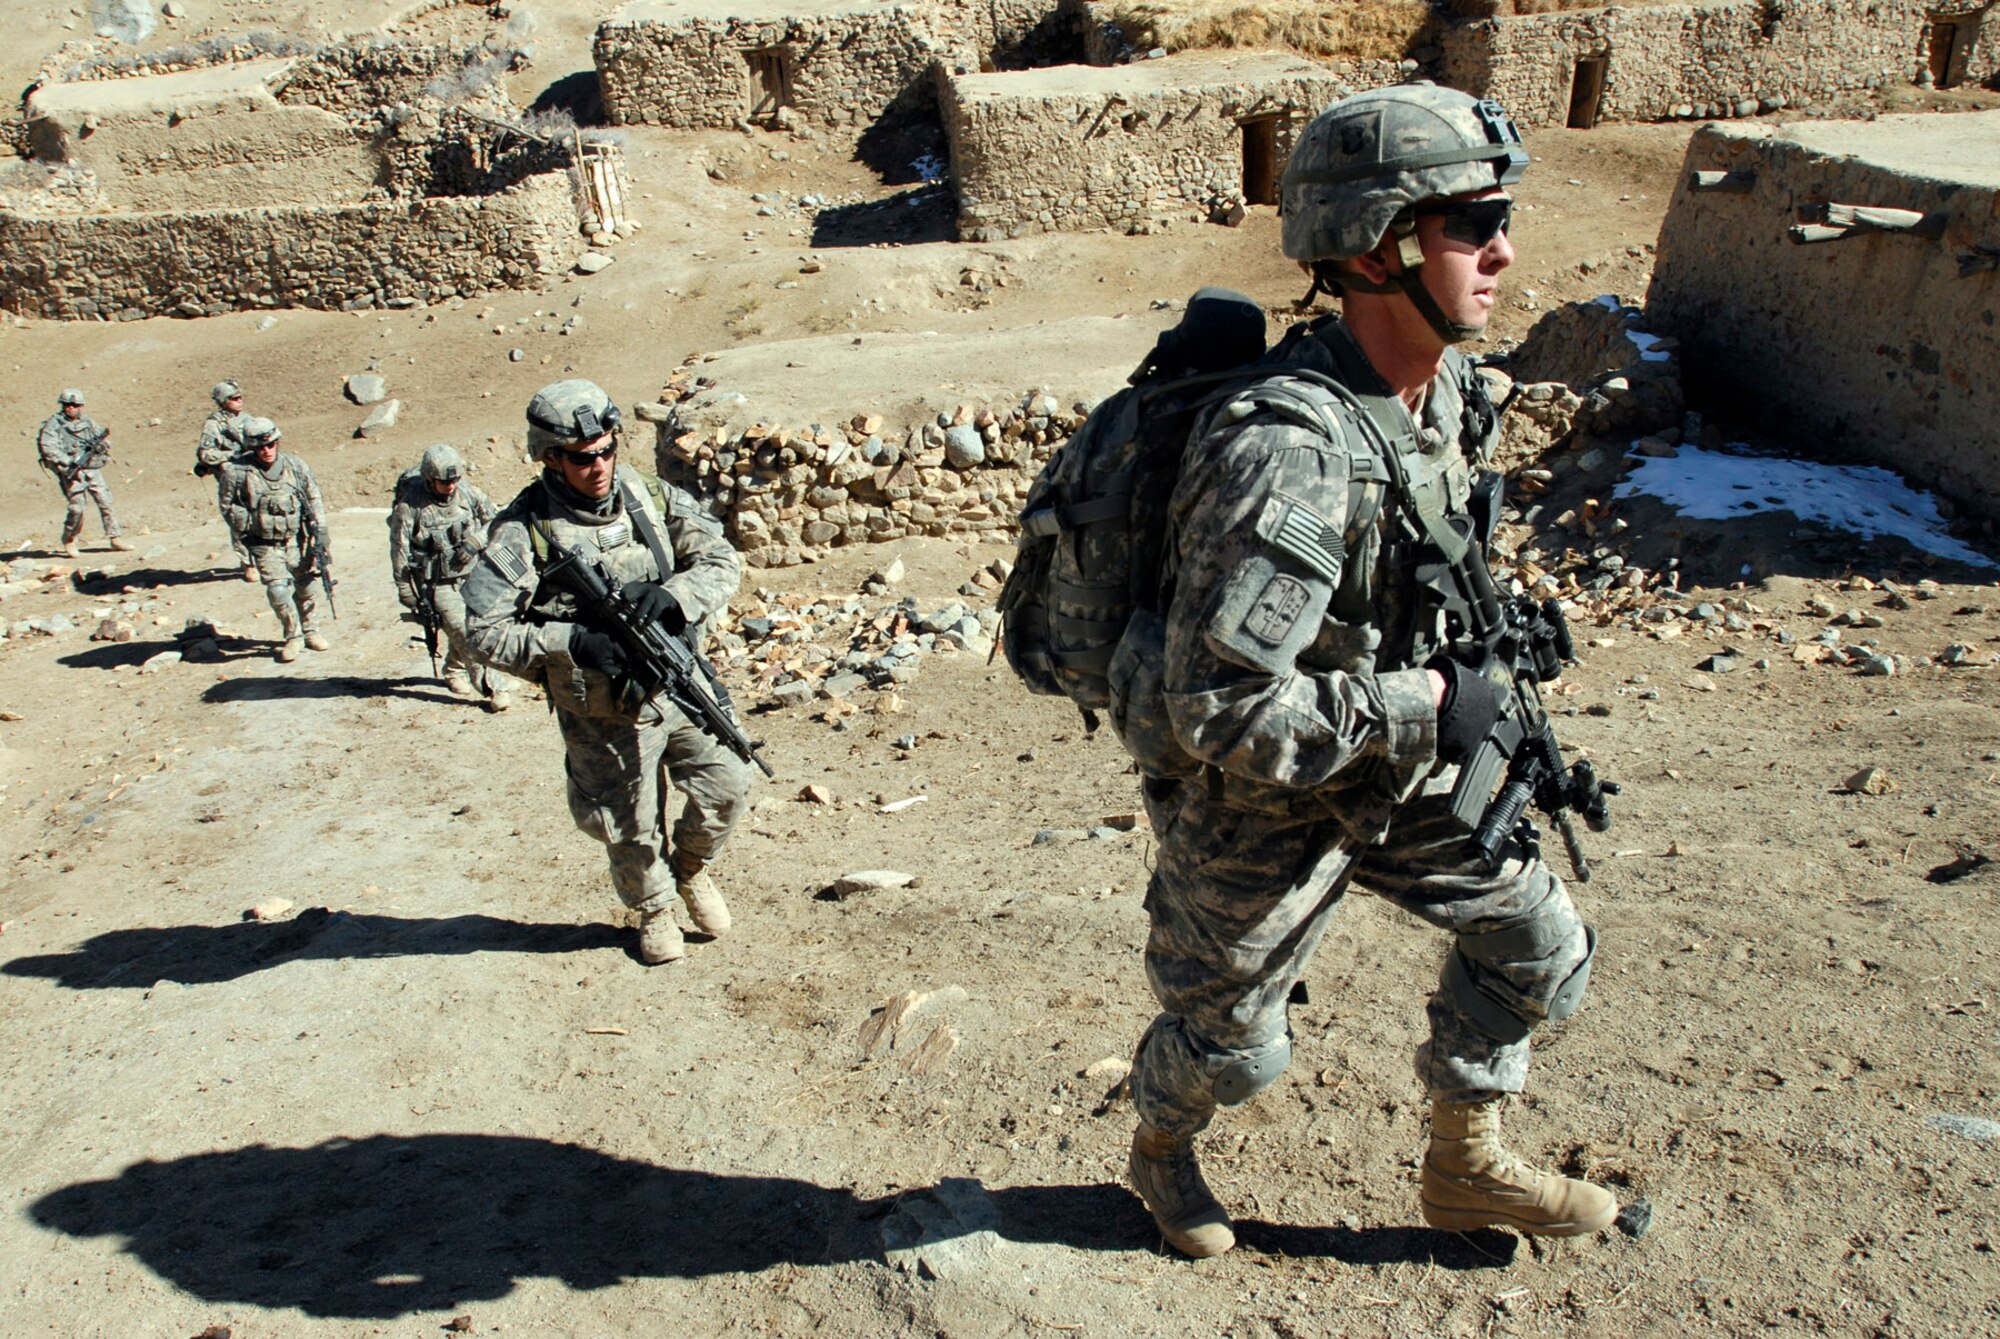 Soldiers with the 101st Airborne Division patrol a small village during an air assault mission in eastern Afghanistan, Nov. 4, 2008.  (Photo by Spc. Mary L. Gonzalez, CJTF-101 Public Affairs)